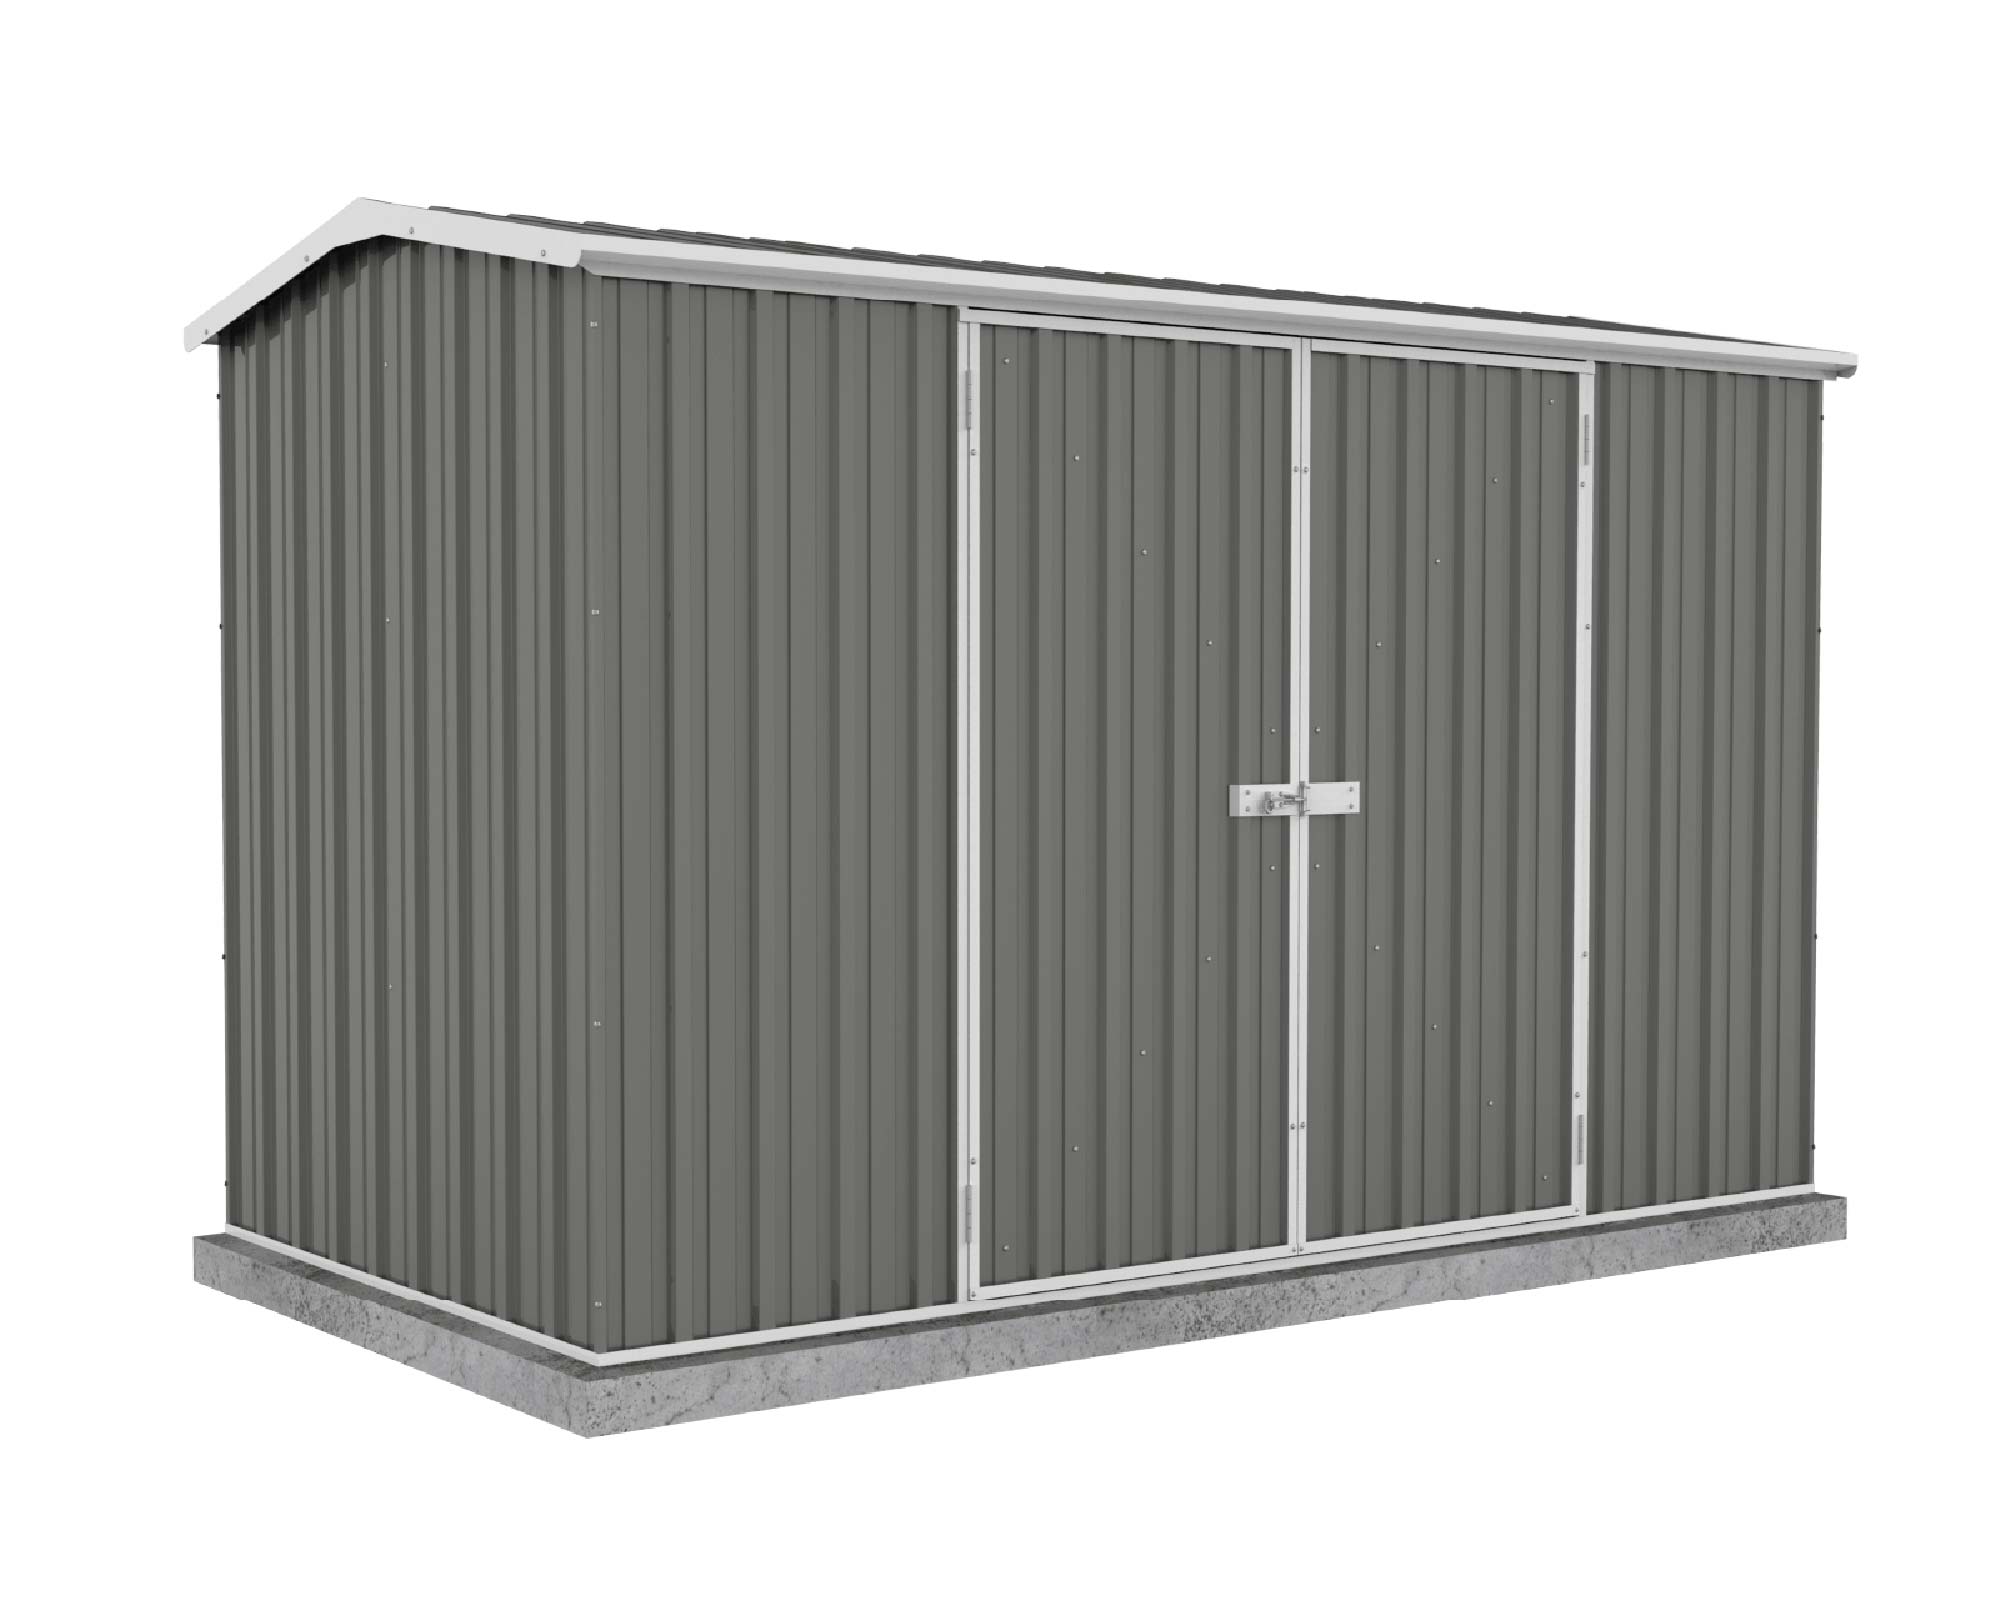 Premier Garden Shed with Double Doors Kit 3m x 1.52m x 1.95m ABSCO - Woodland Grey